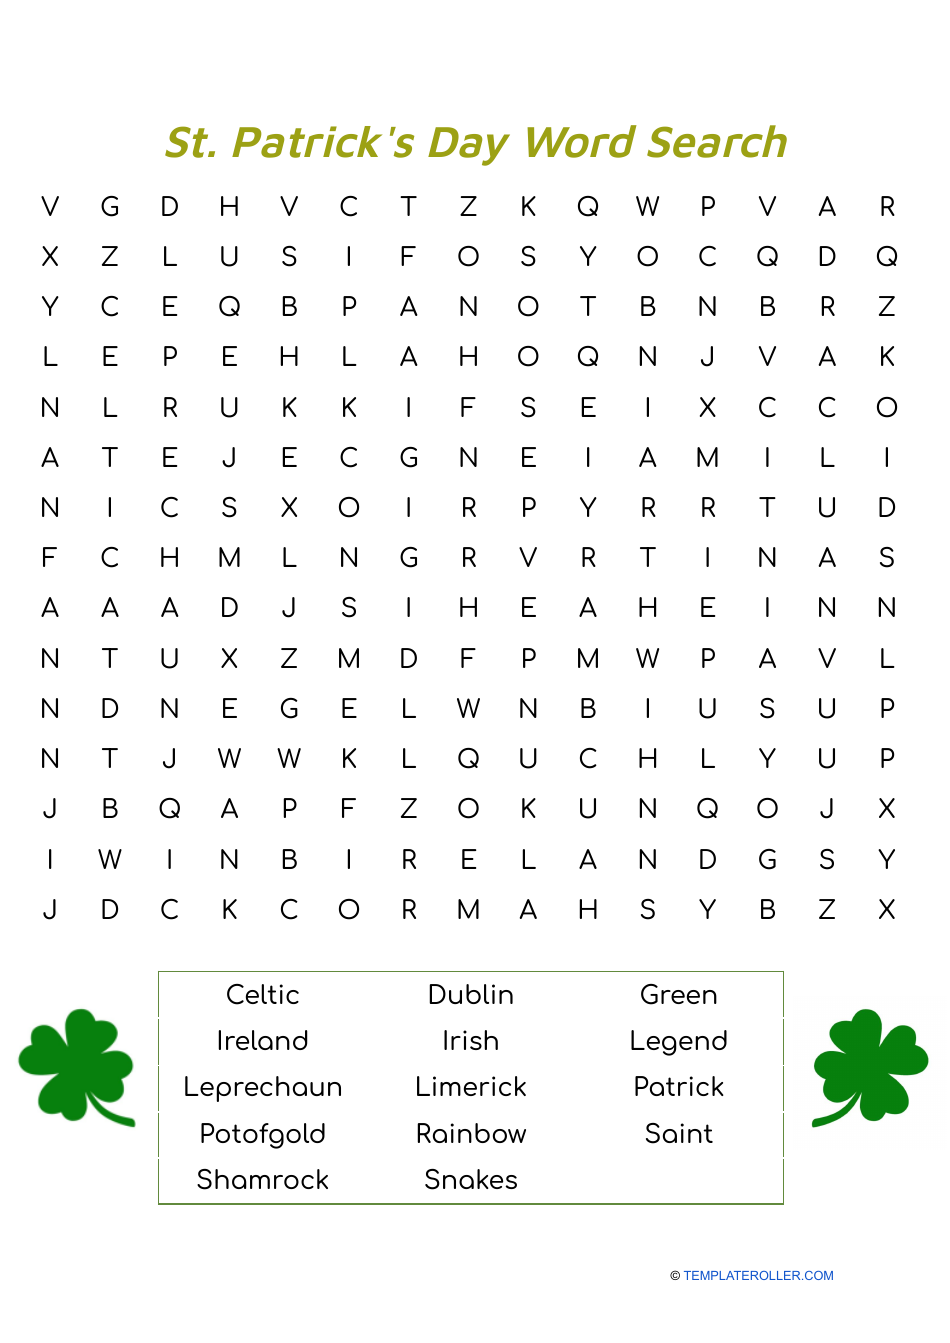 St. Patrick's Day Word Search with Shamrock illustration